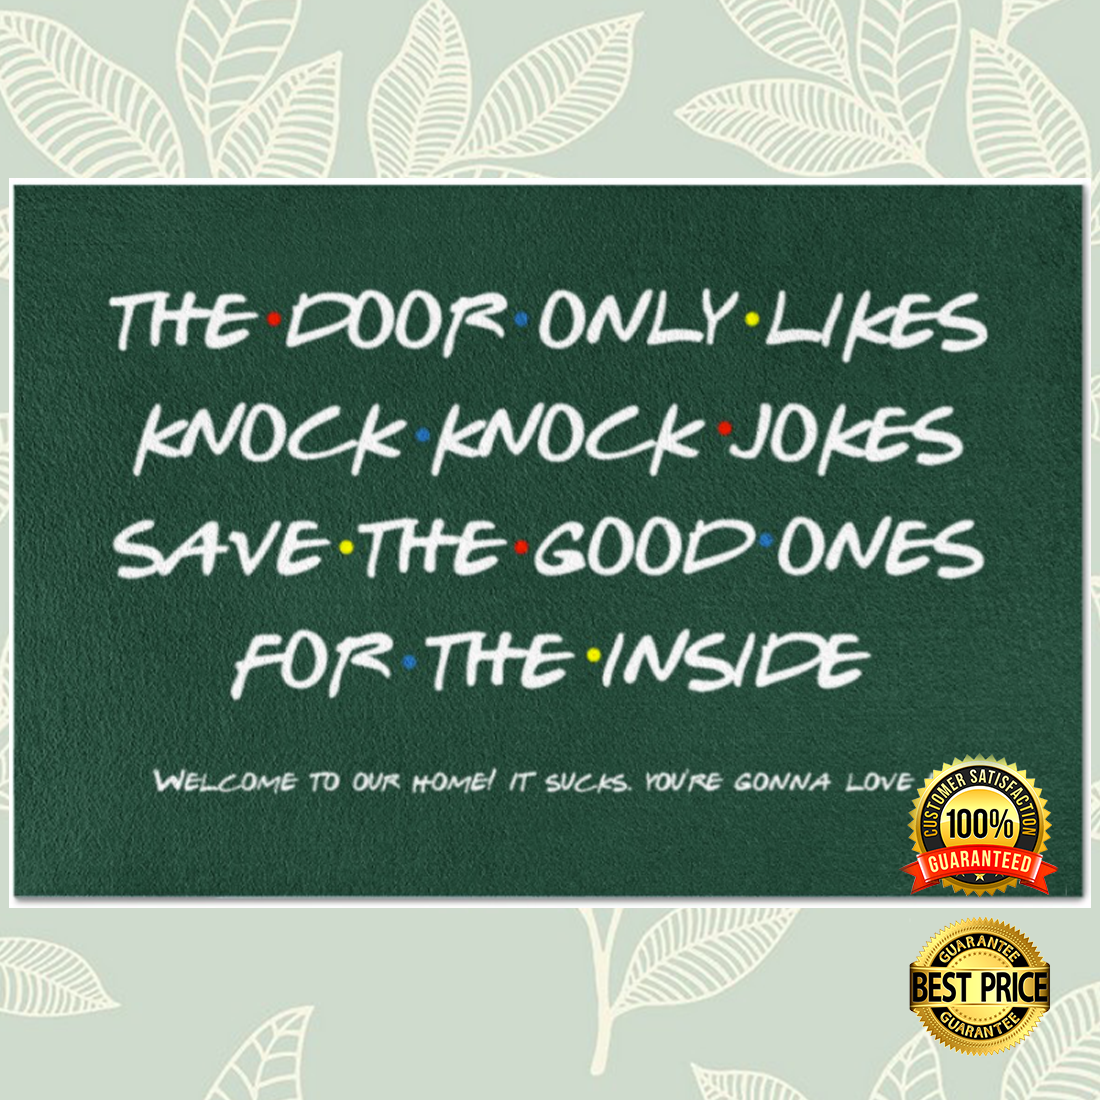 The door only likes knock knock jokes save the good ones for the inside doormat 2